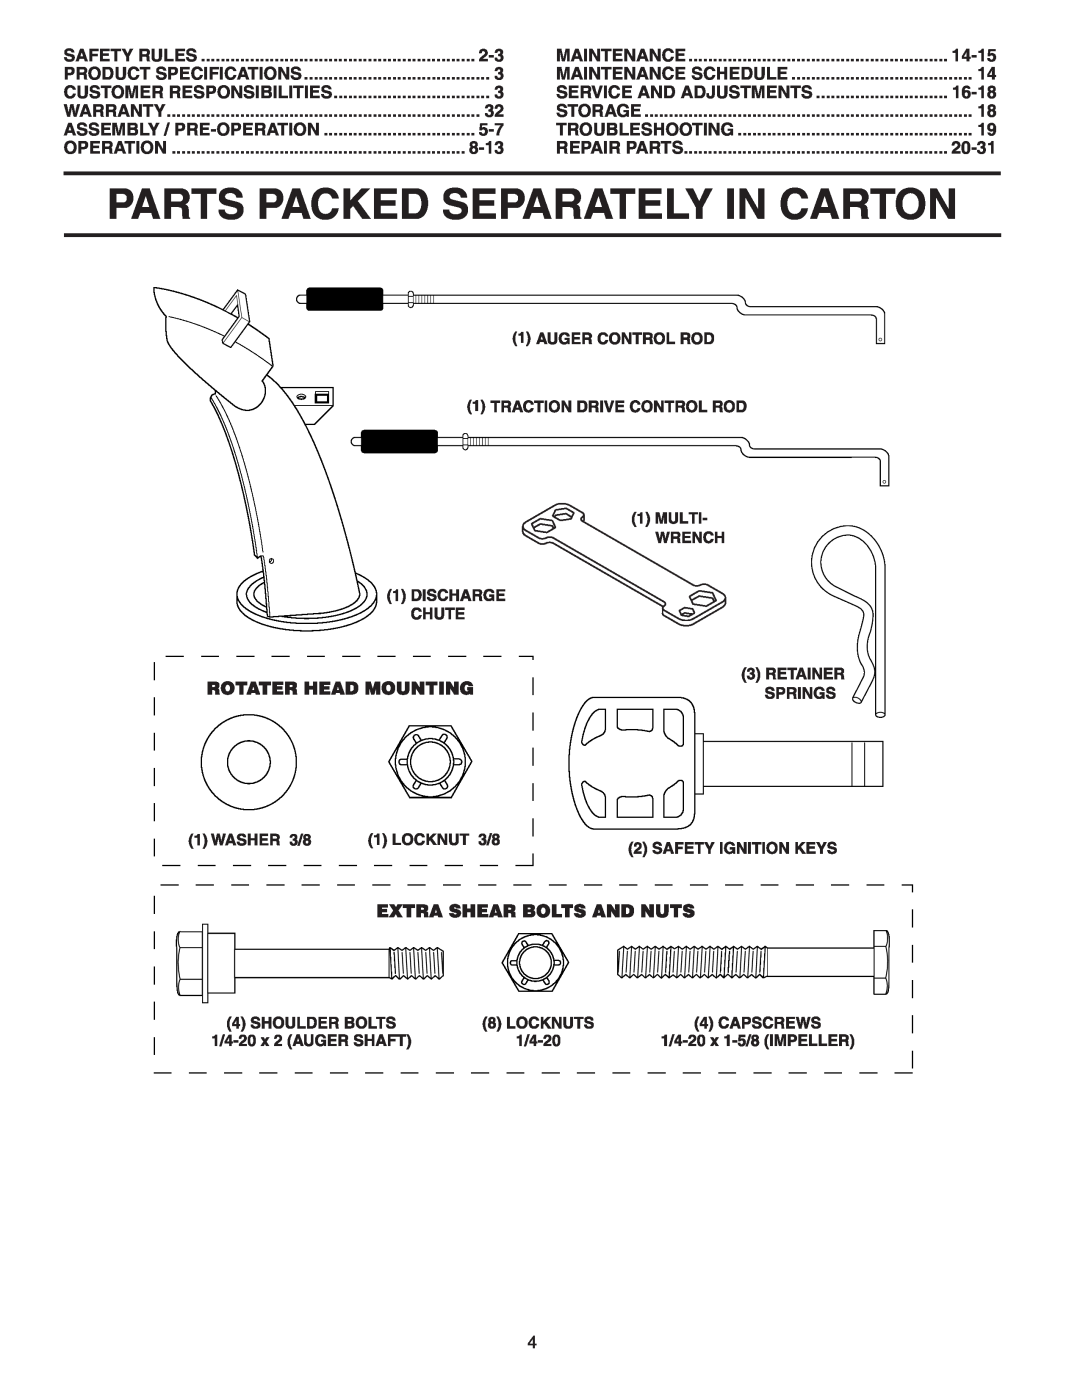 Poulan 189645 Parts Packed Separately In Carton, 8-13, 14-15, Service And Adjustments, 16-18, 20-31, Safety Rules, Storage 